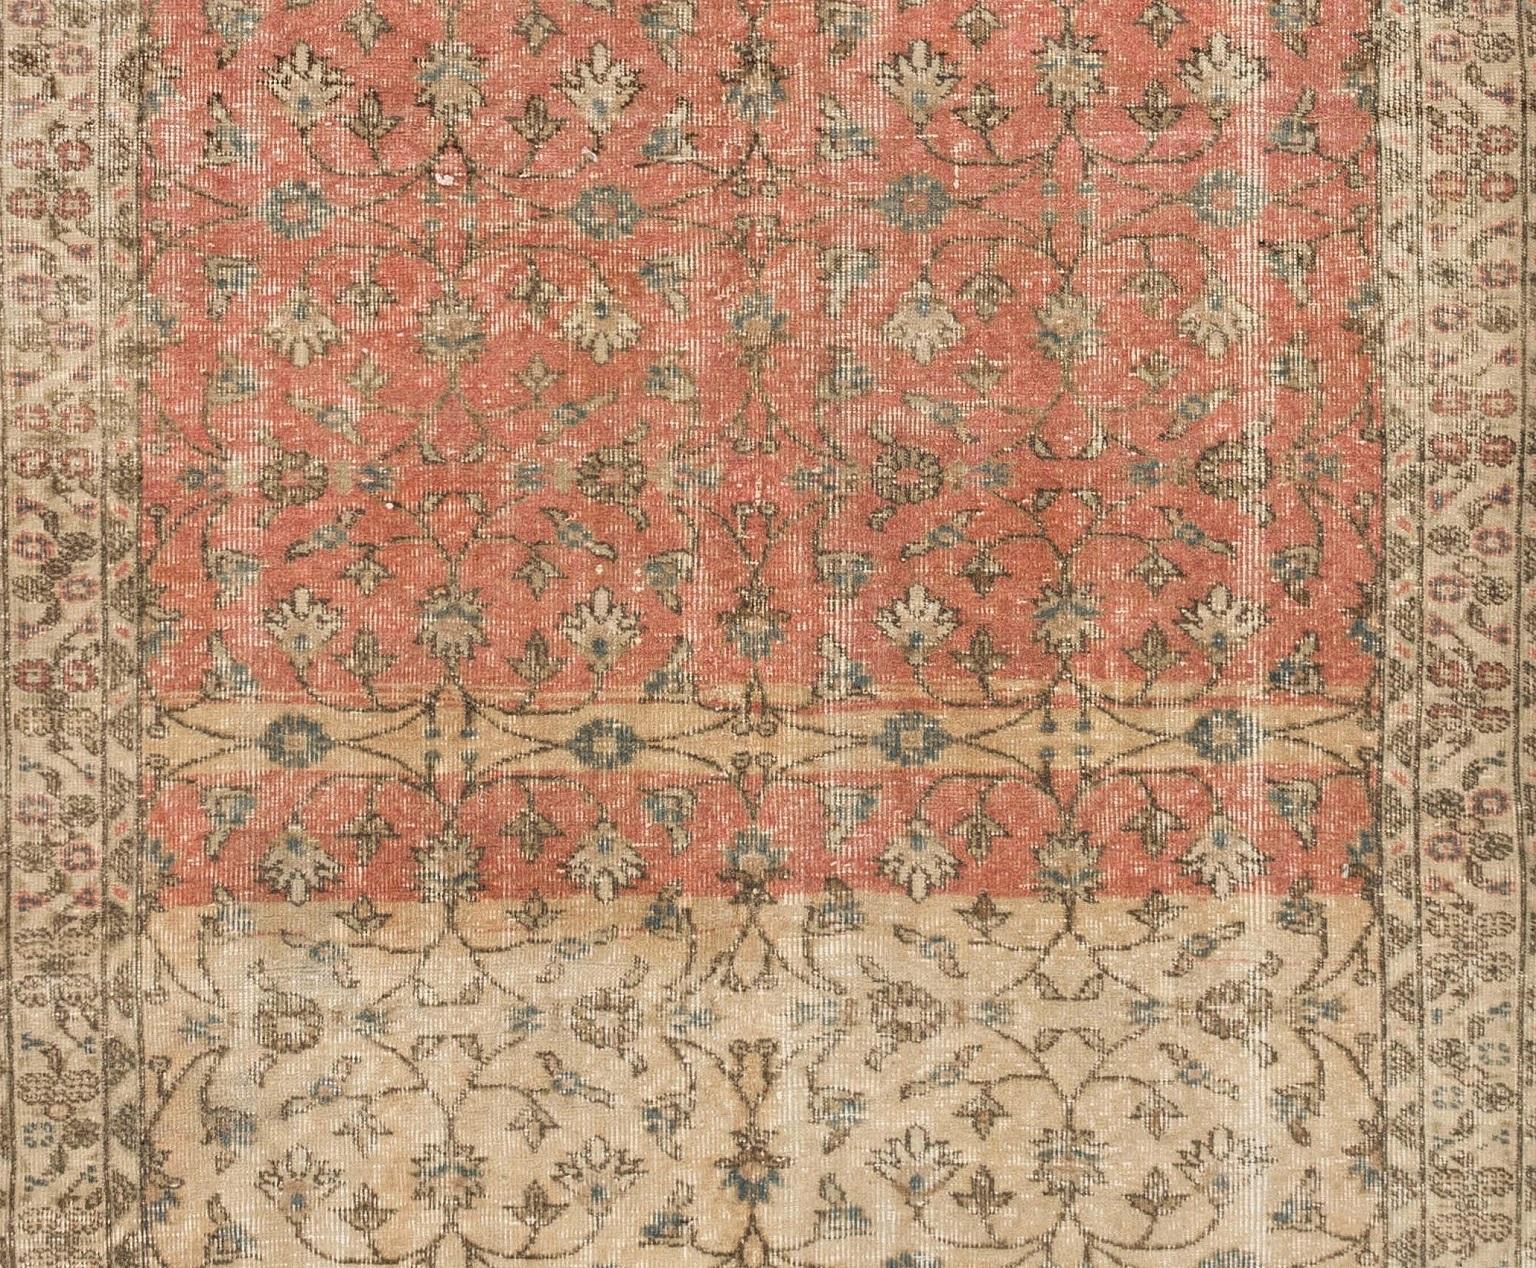 A mid-20th century hand-knotted runner from Turkey with an all-over delicate floral design in beige and dark coral pink and with wool pile on cotton foundation. In good condition, sturdy and as clean as a brand new rug. Measures: 4.8 x 12.8 ft.